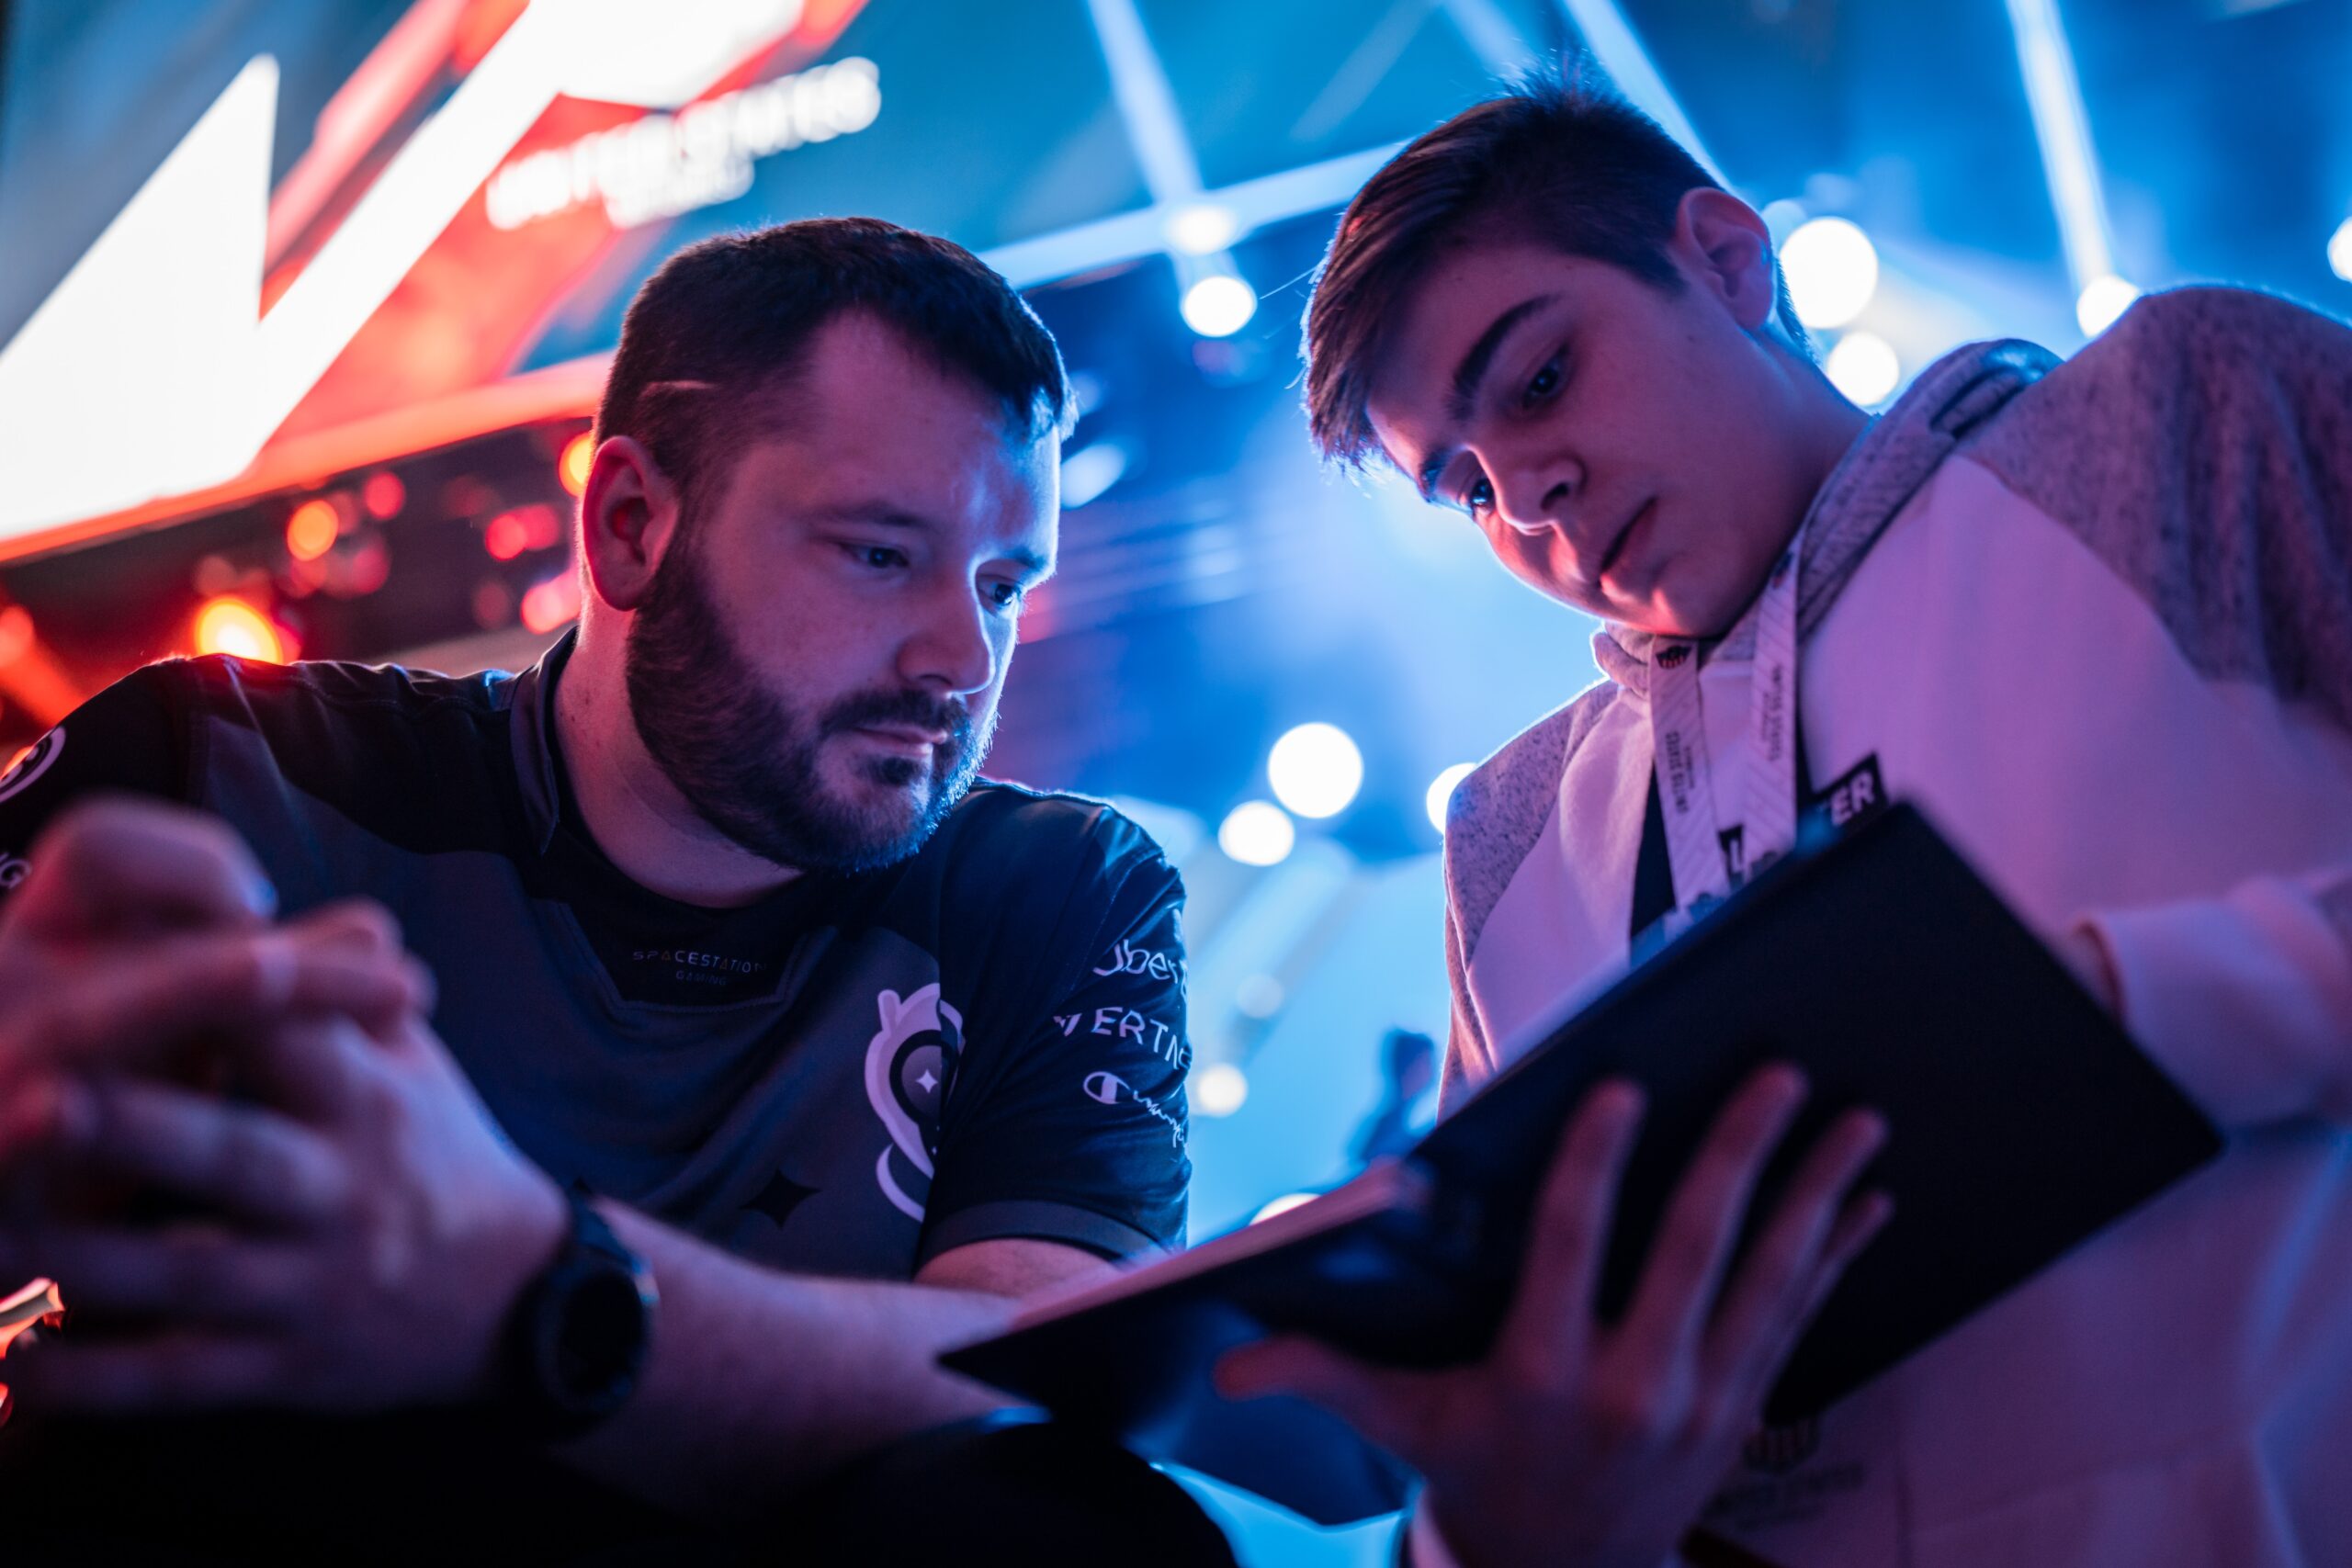 Lycan had always aimed to compete at the highest level in Siege as a player, but found his love for coaching in 2018